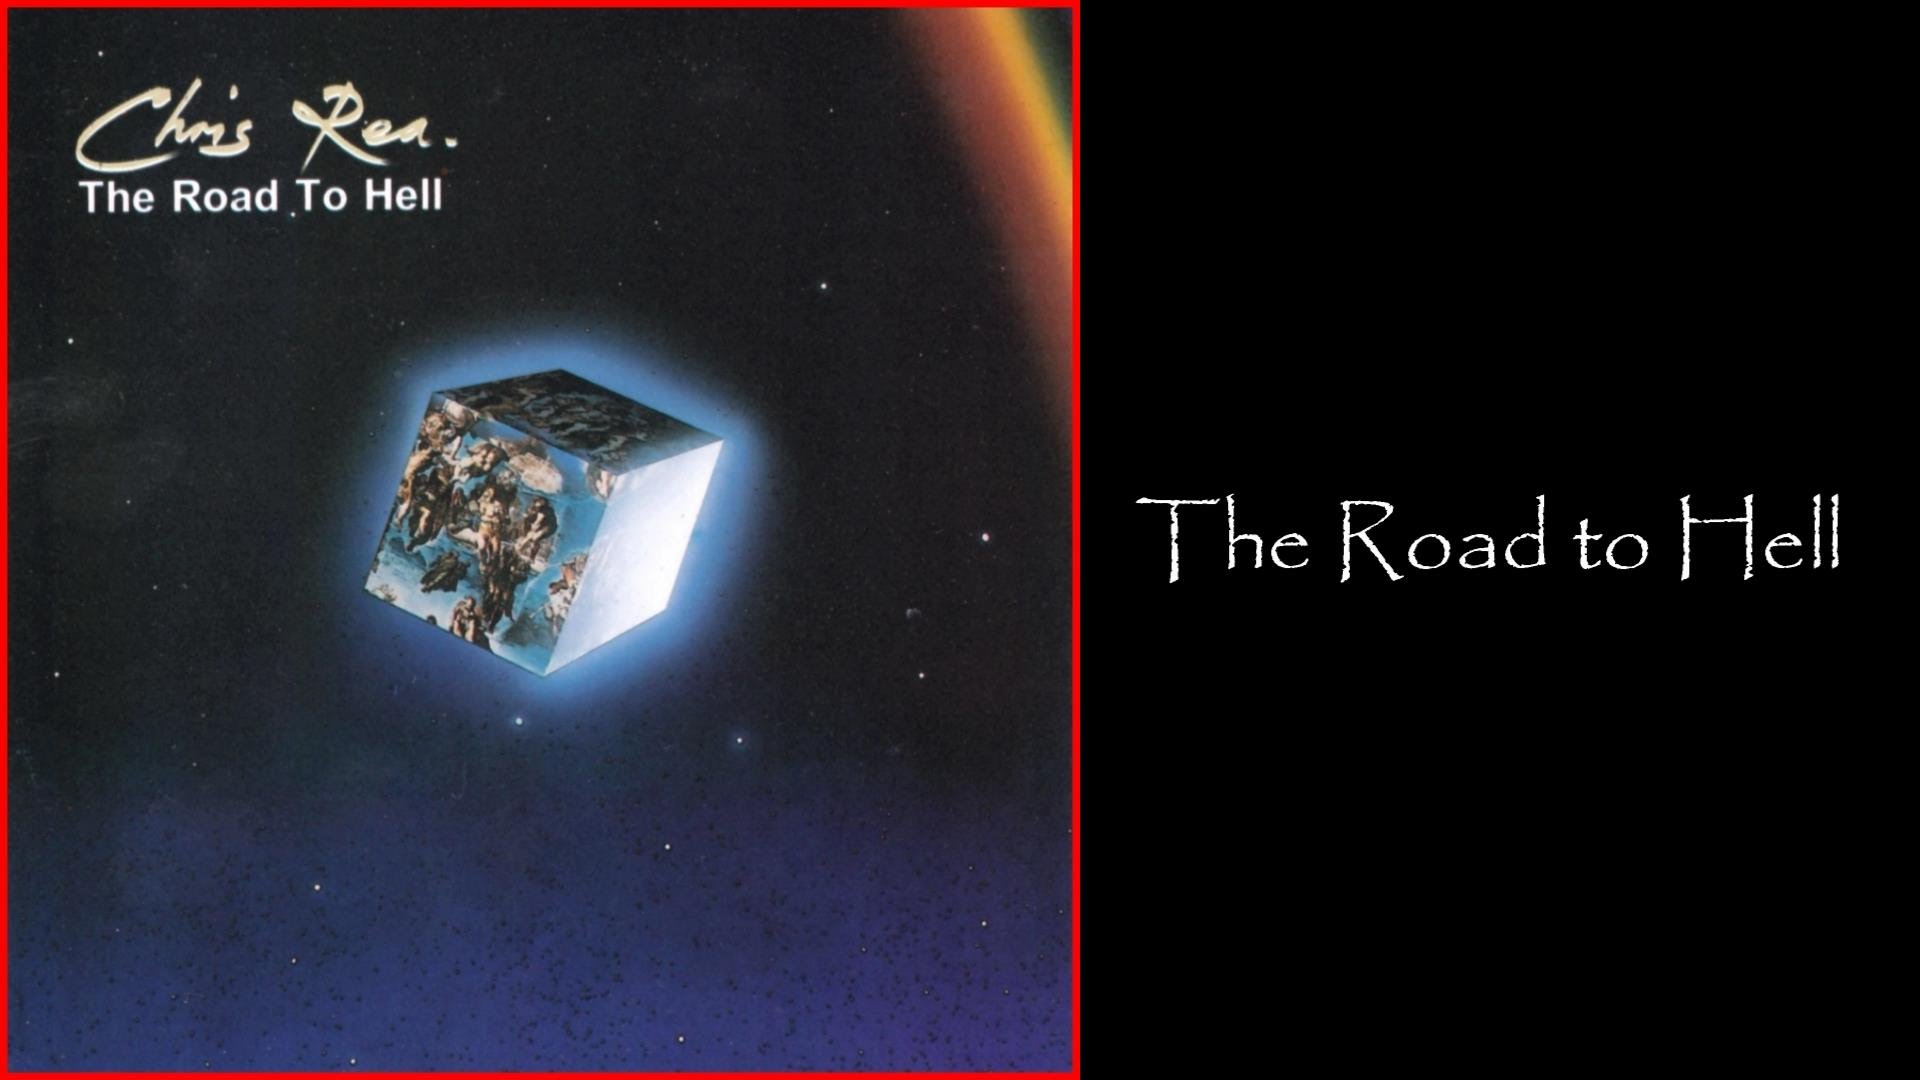 Chris Rea - The Road To Hell (1989 LP Album Medley) - YouTube